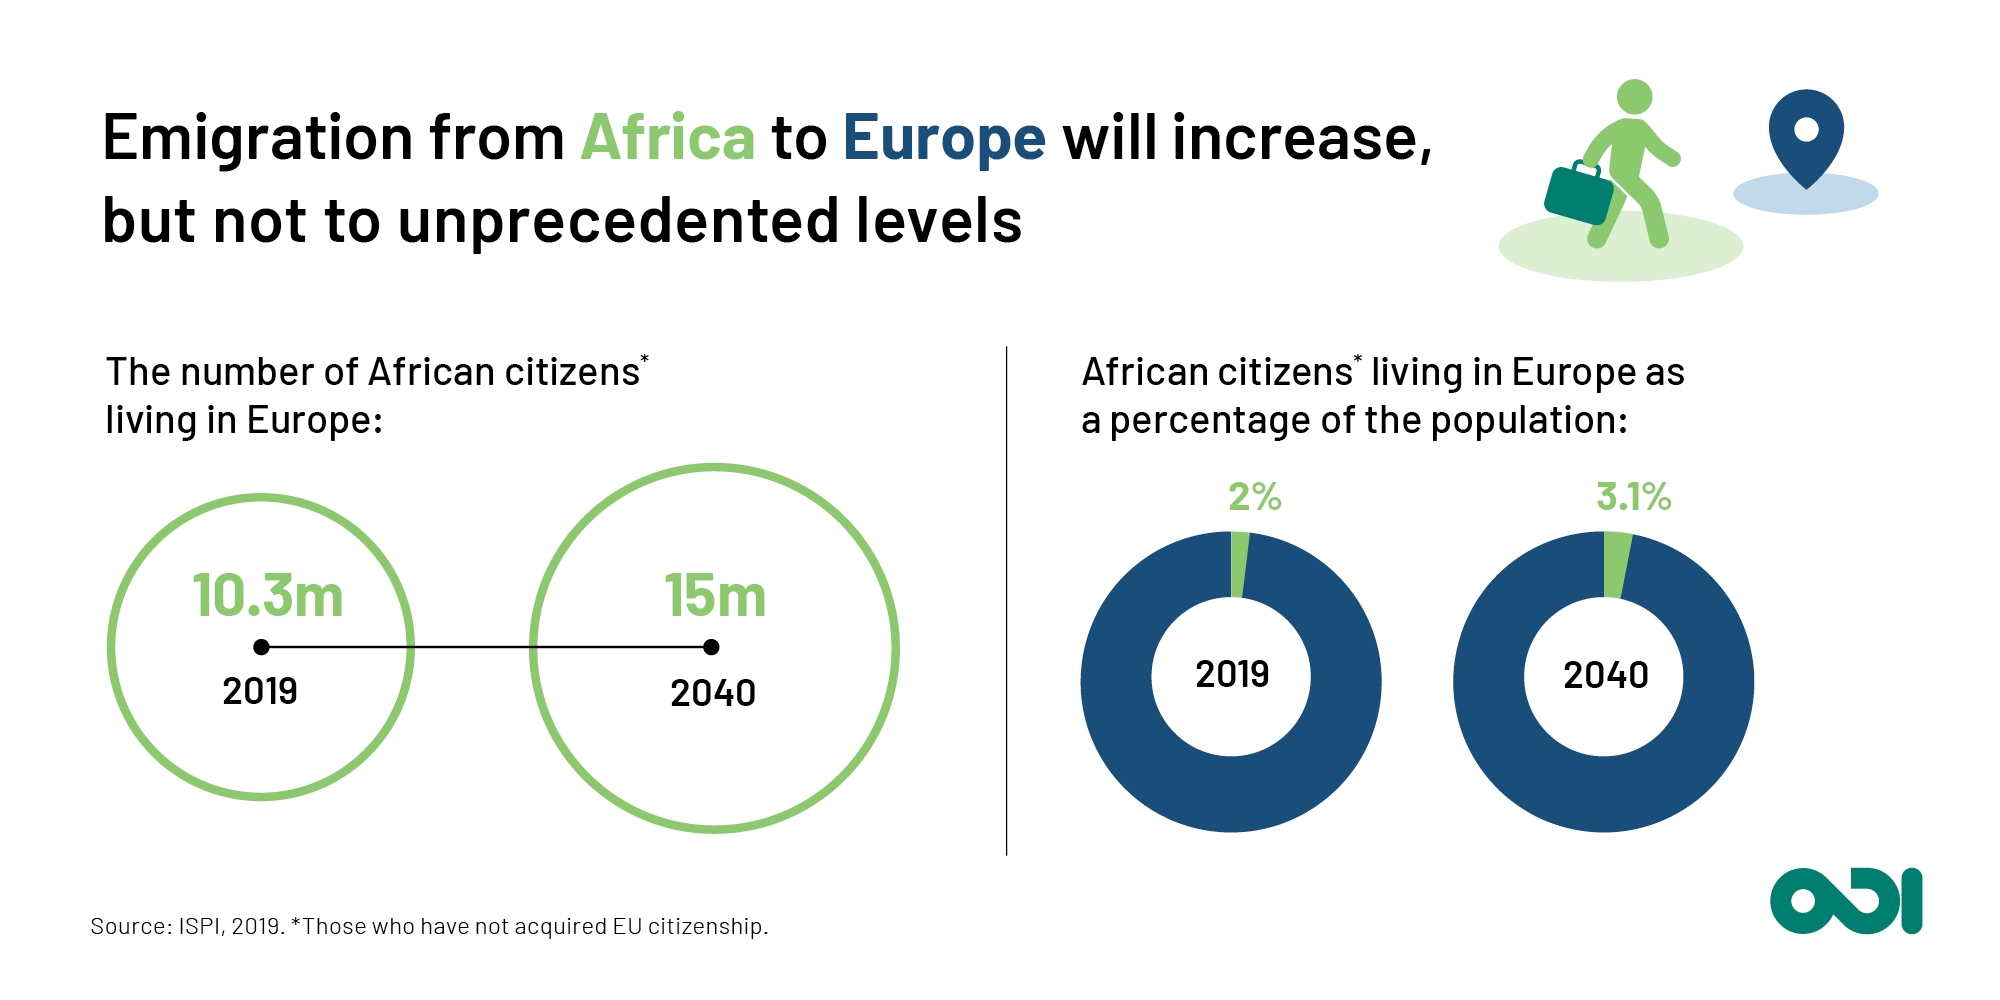 Emigration from Africa to Europe will increase, but not to unprecedented levels